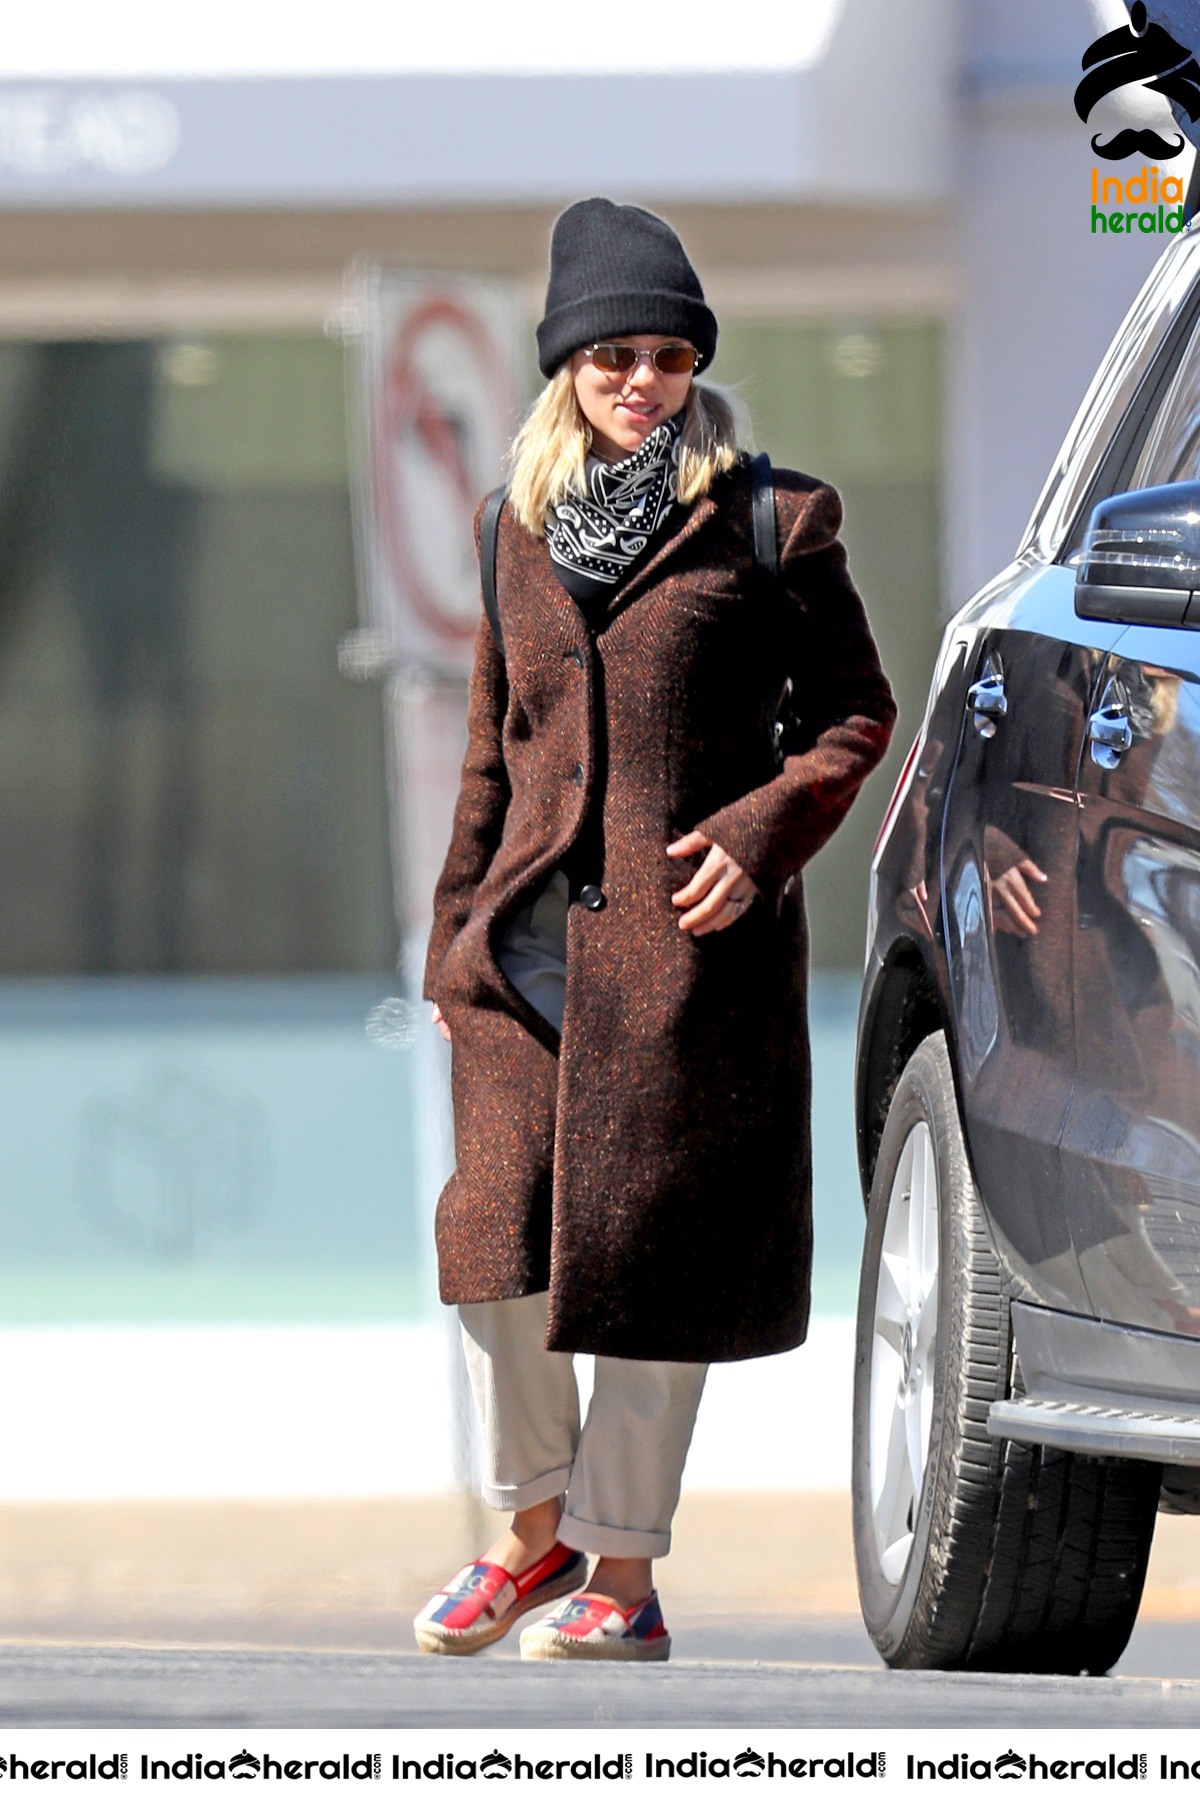 Scarlett Johansson caught by Paparazzi as she does grocery shopping in the Hamptons